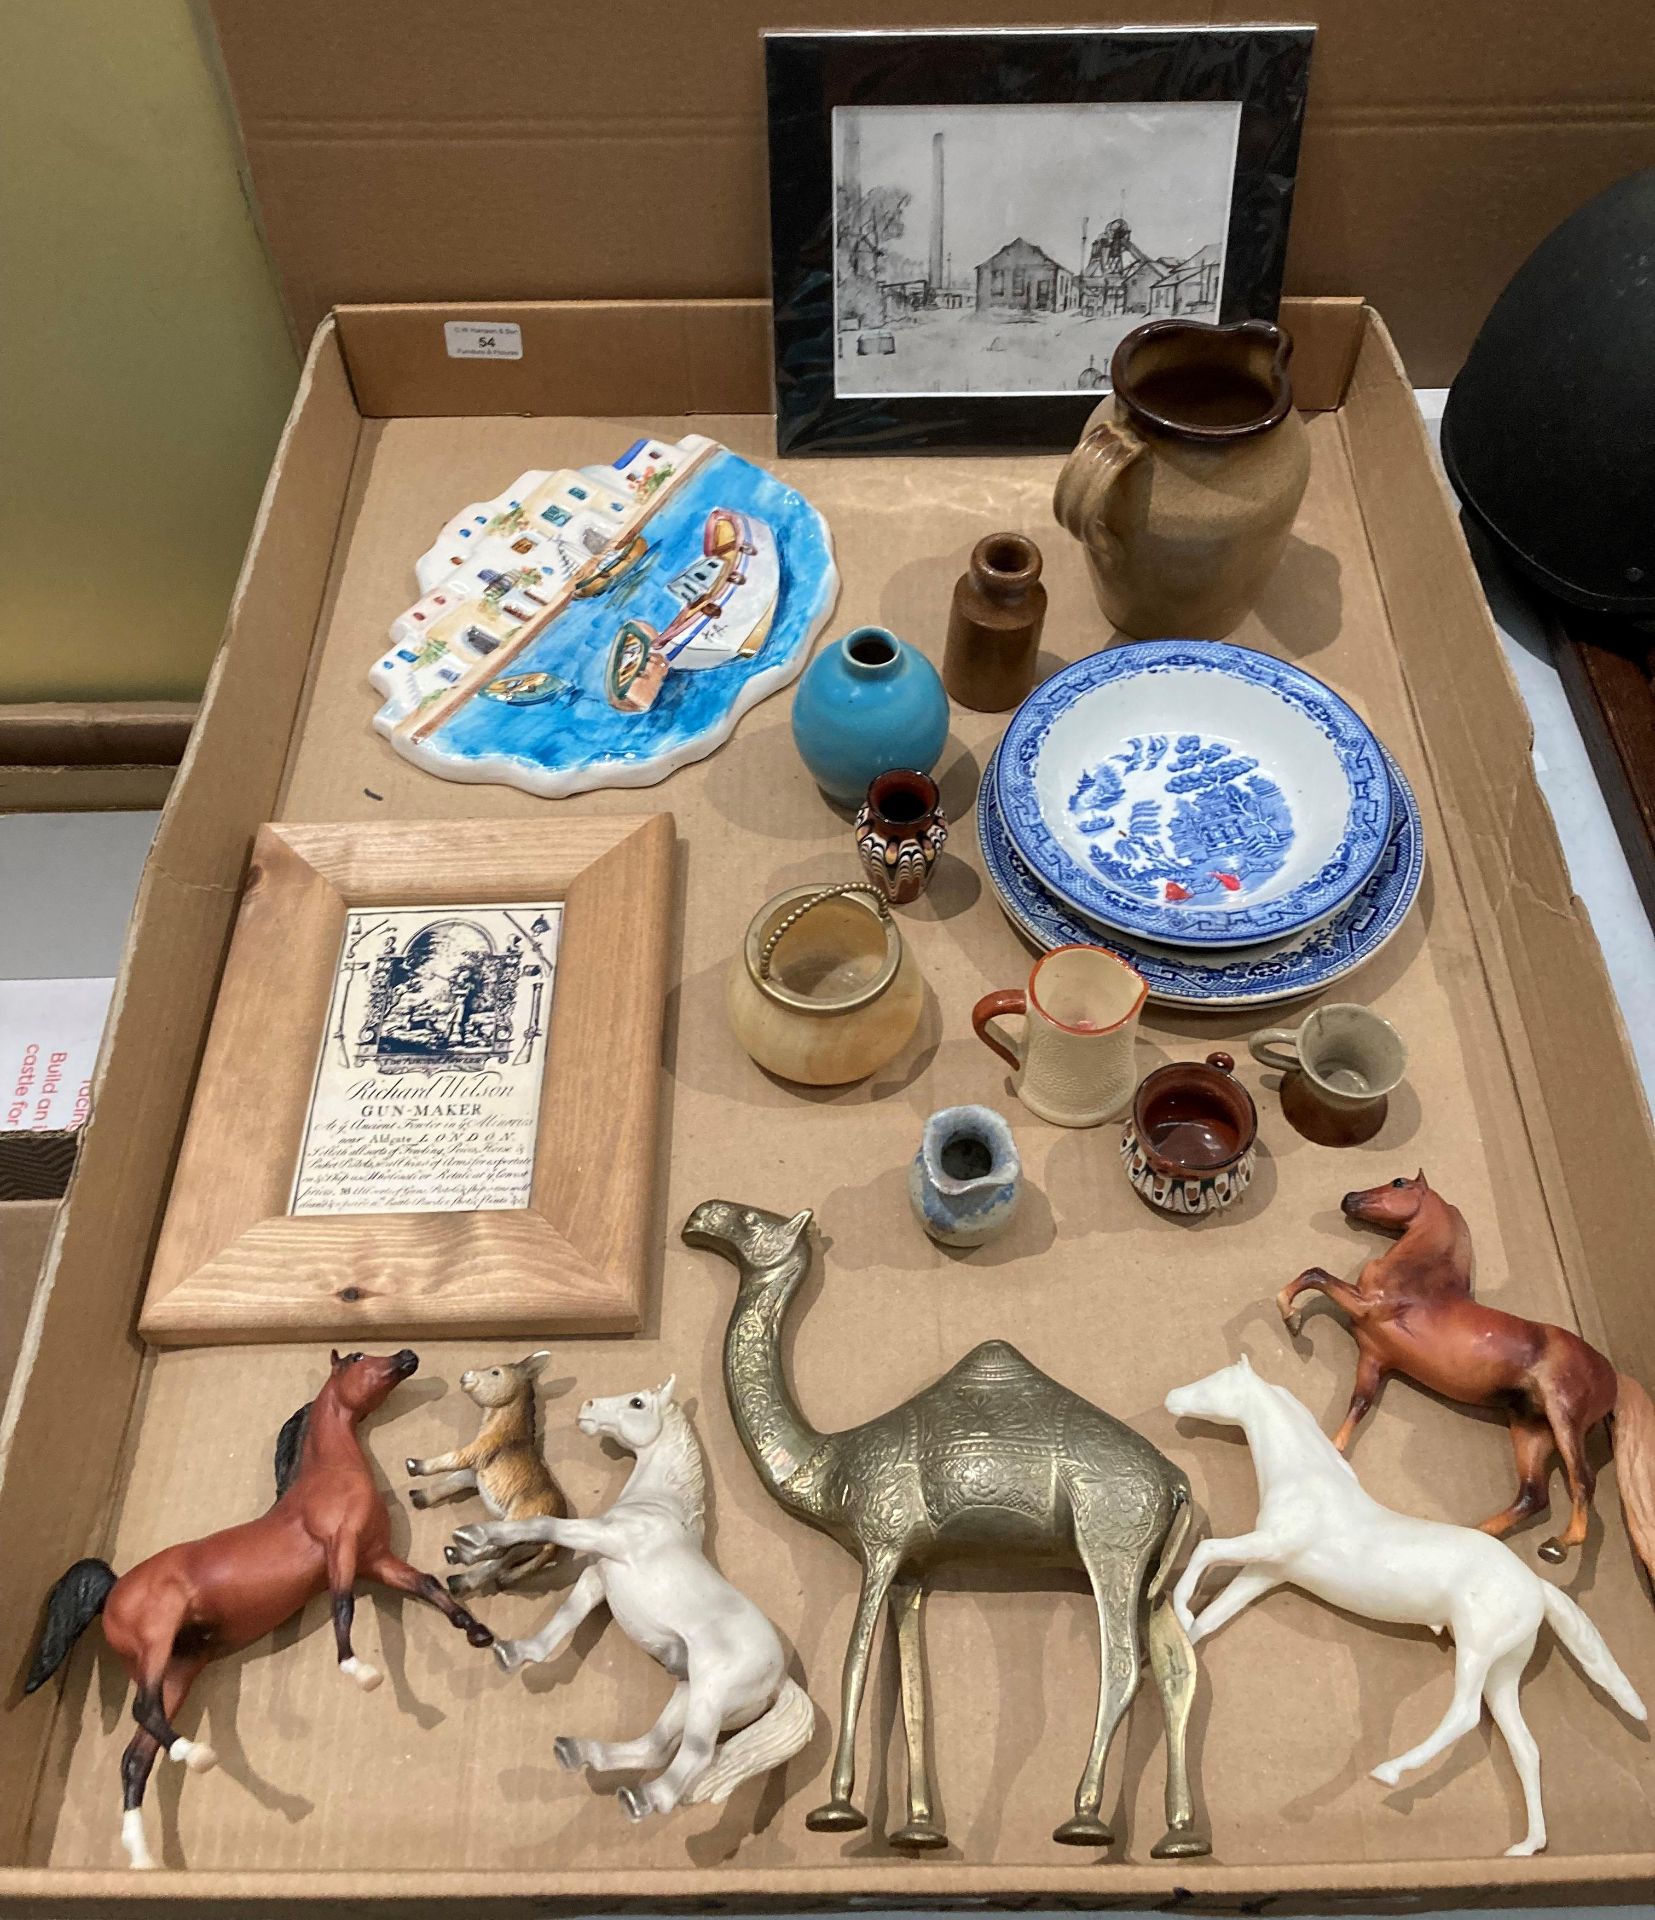 Contents to tray - plastic horses, small jugs and vases etc.